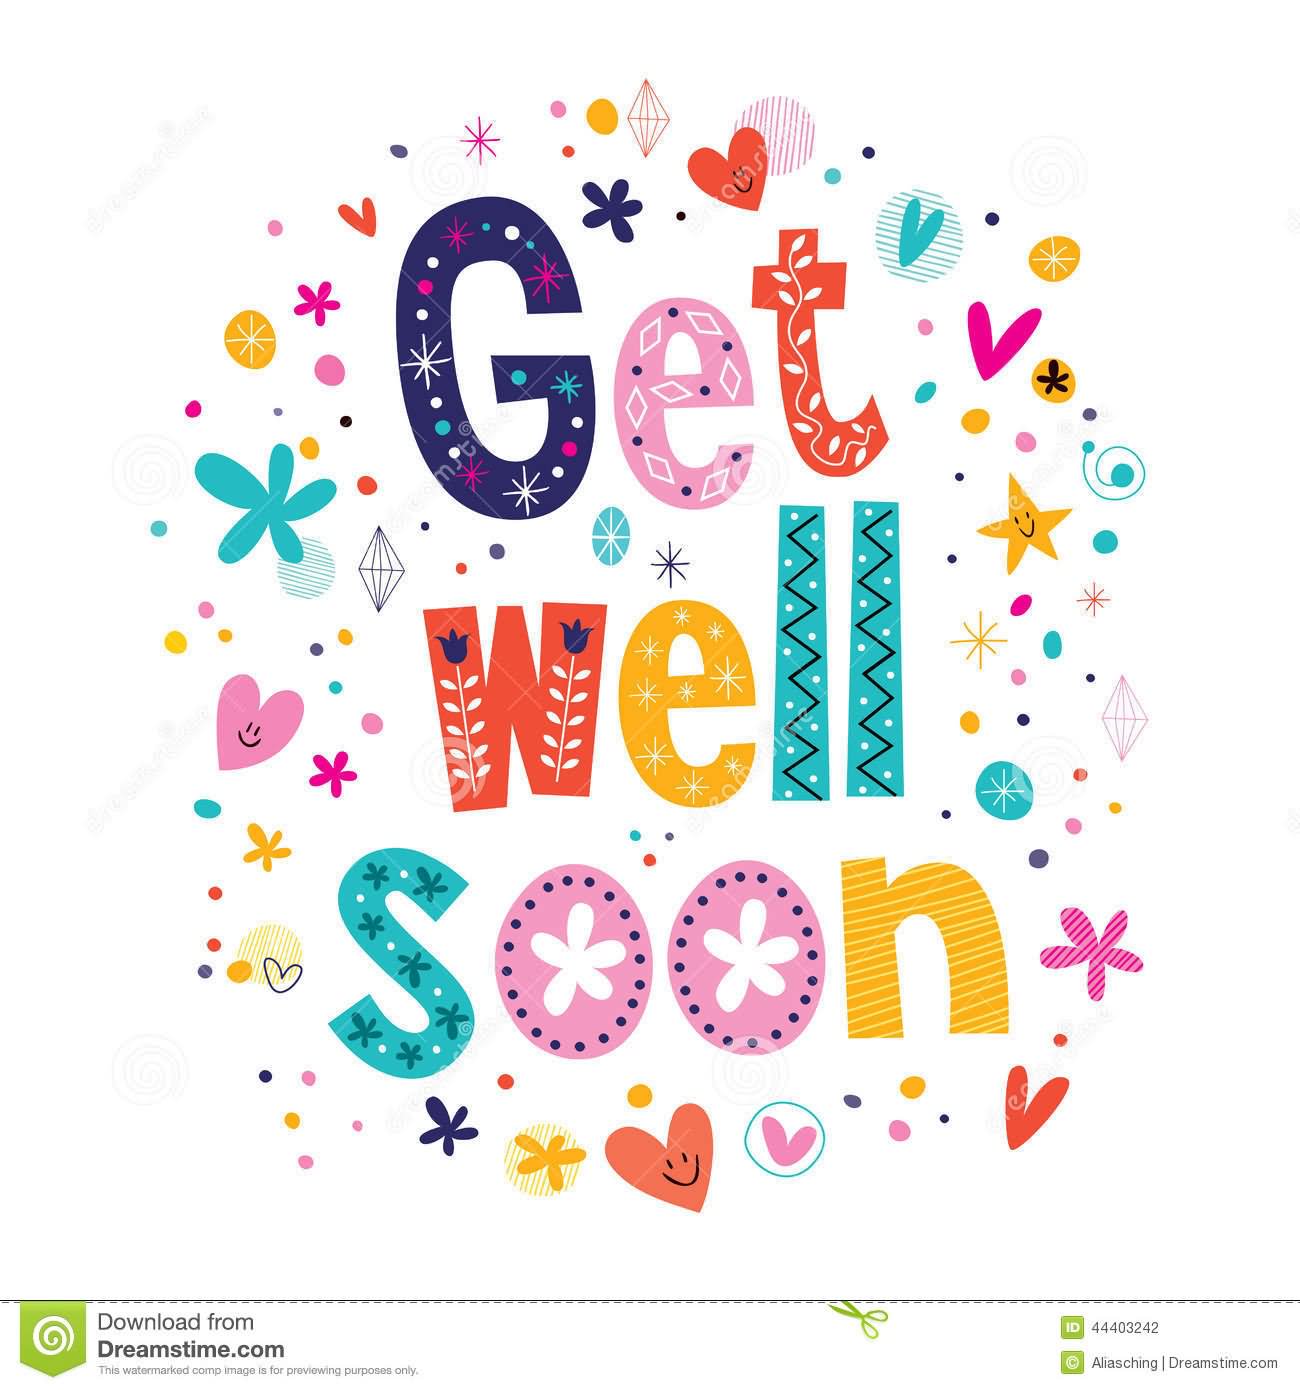 Get well soon clipart pictures - ClipartFest